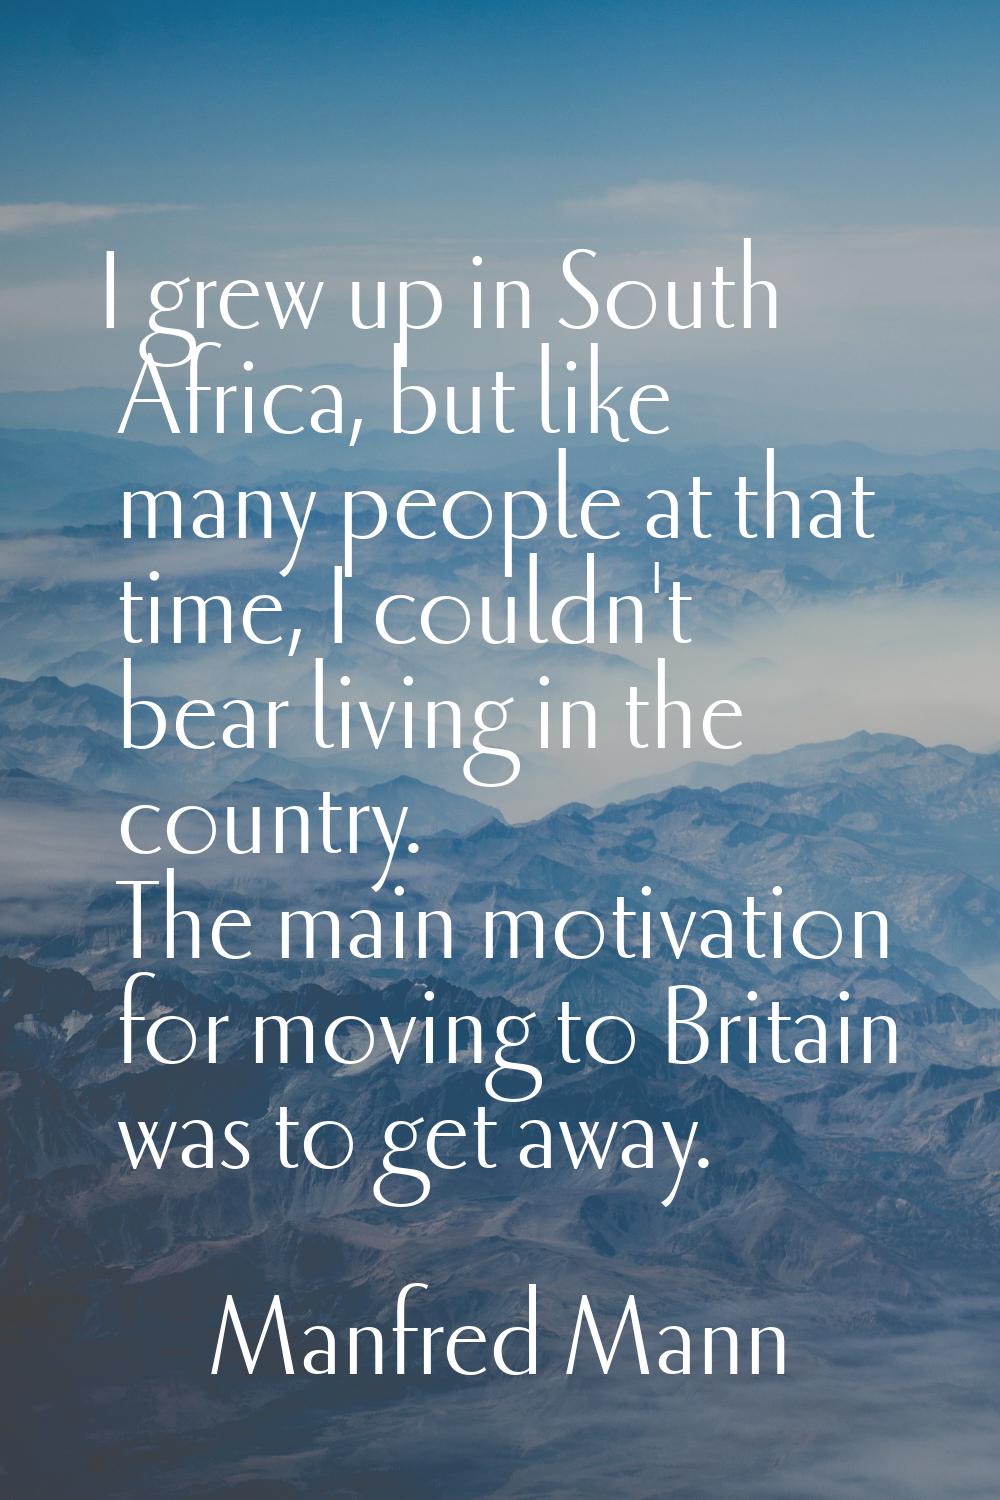 I grew up in South Africa, but like many people at that time, I couldn't bear living in the country